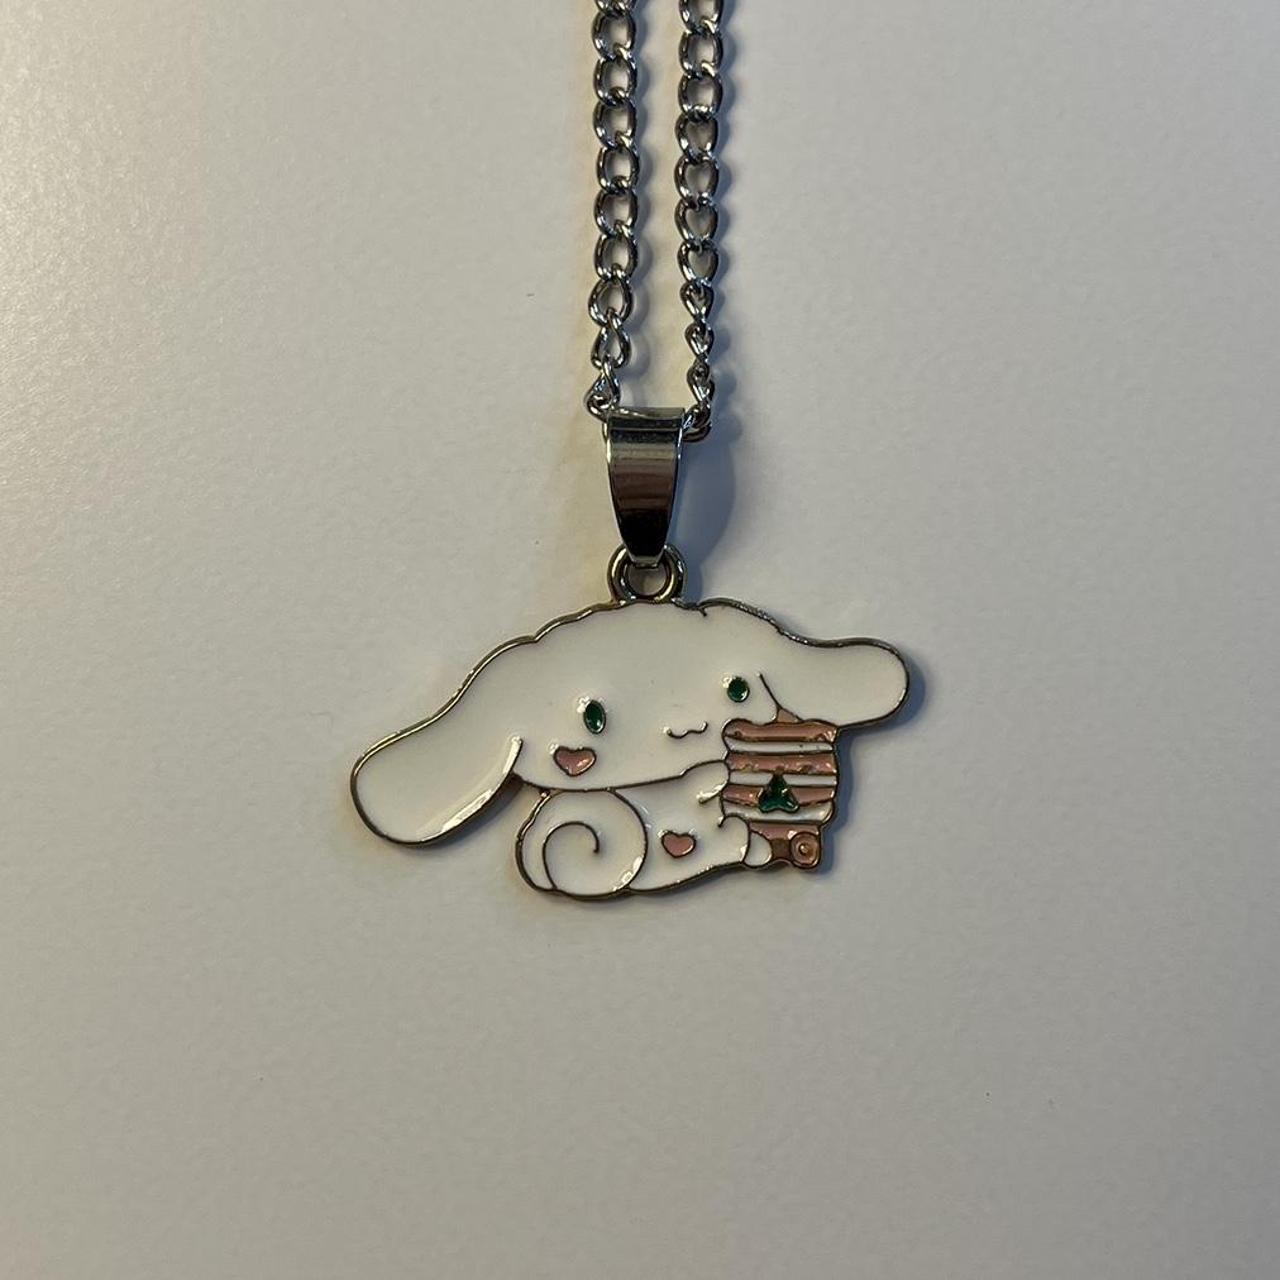 ❥ Cinnamoroll necklace 🥥, This is a cute necklace of